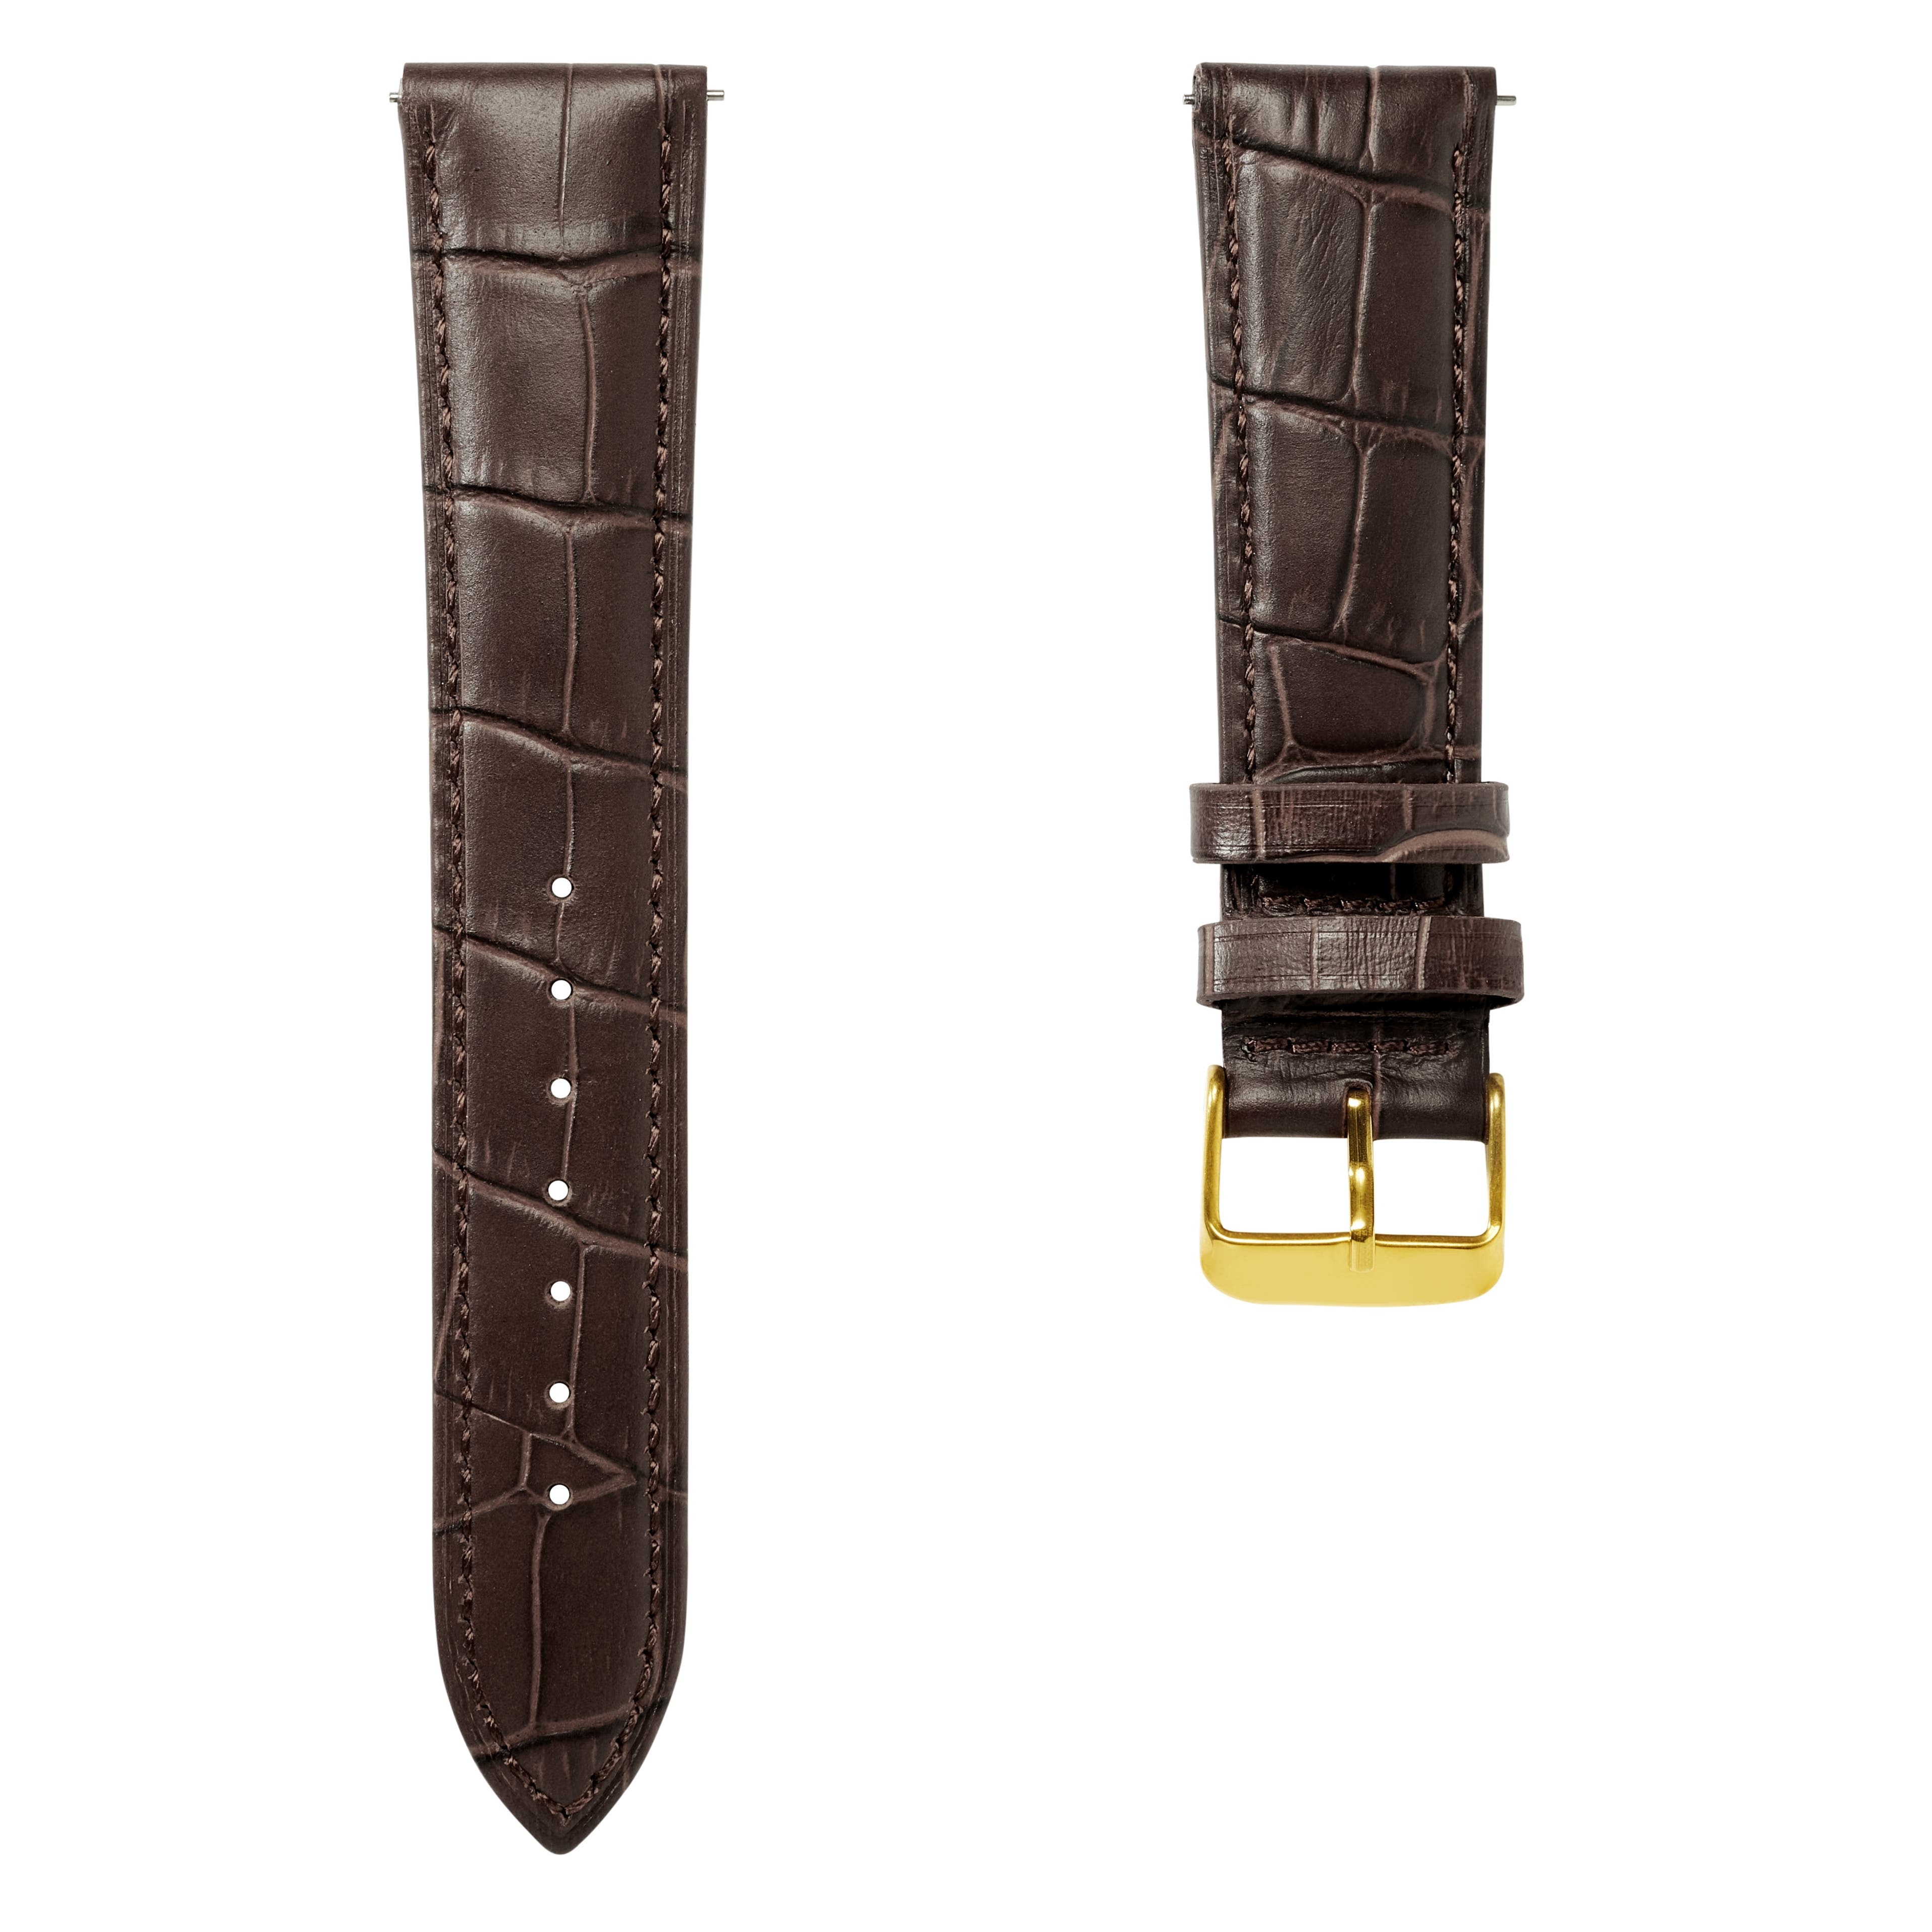 22 mm Crocodile-Embossed Dark-Brown Leather Watch Strap with Gold-Tone Buckle – Quick Release